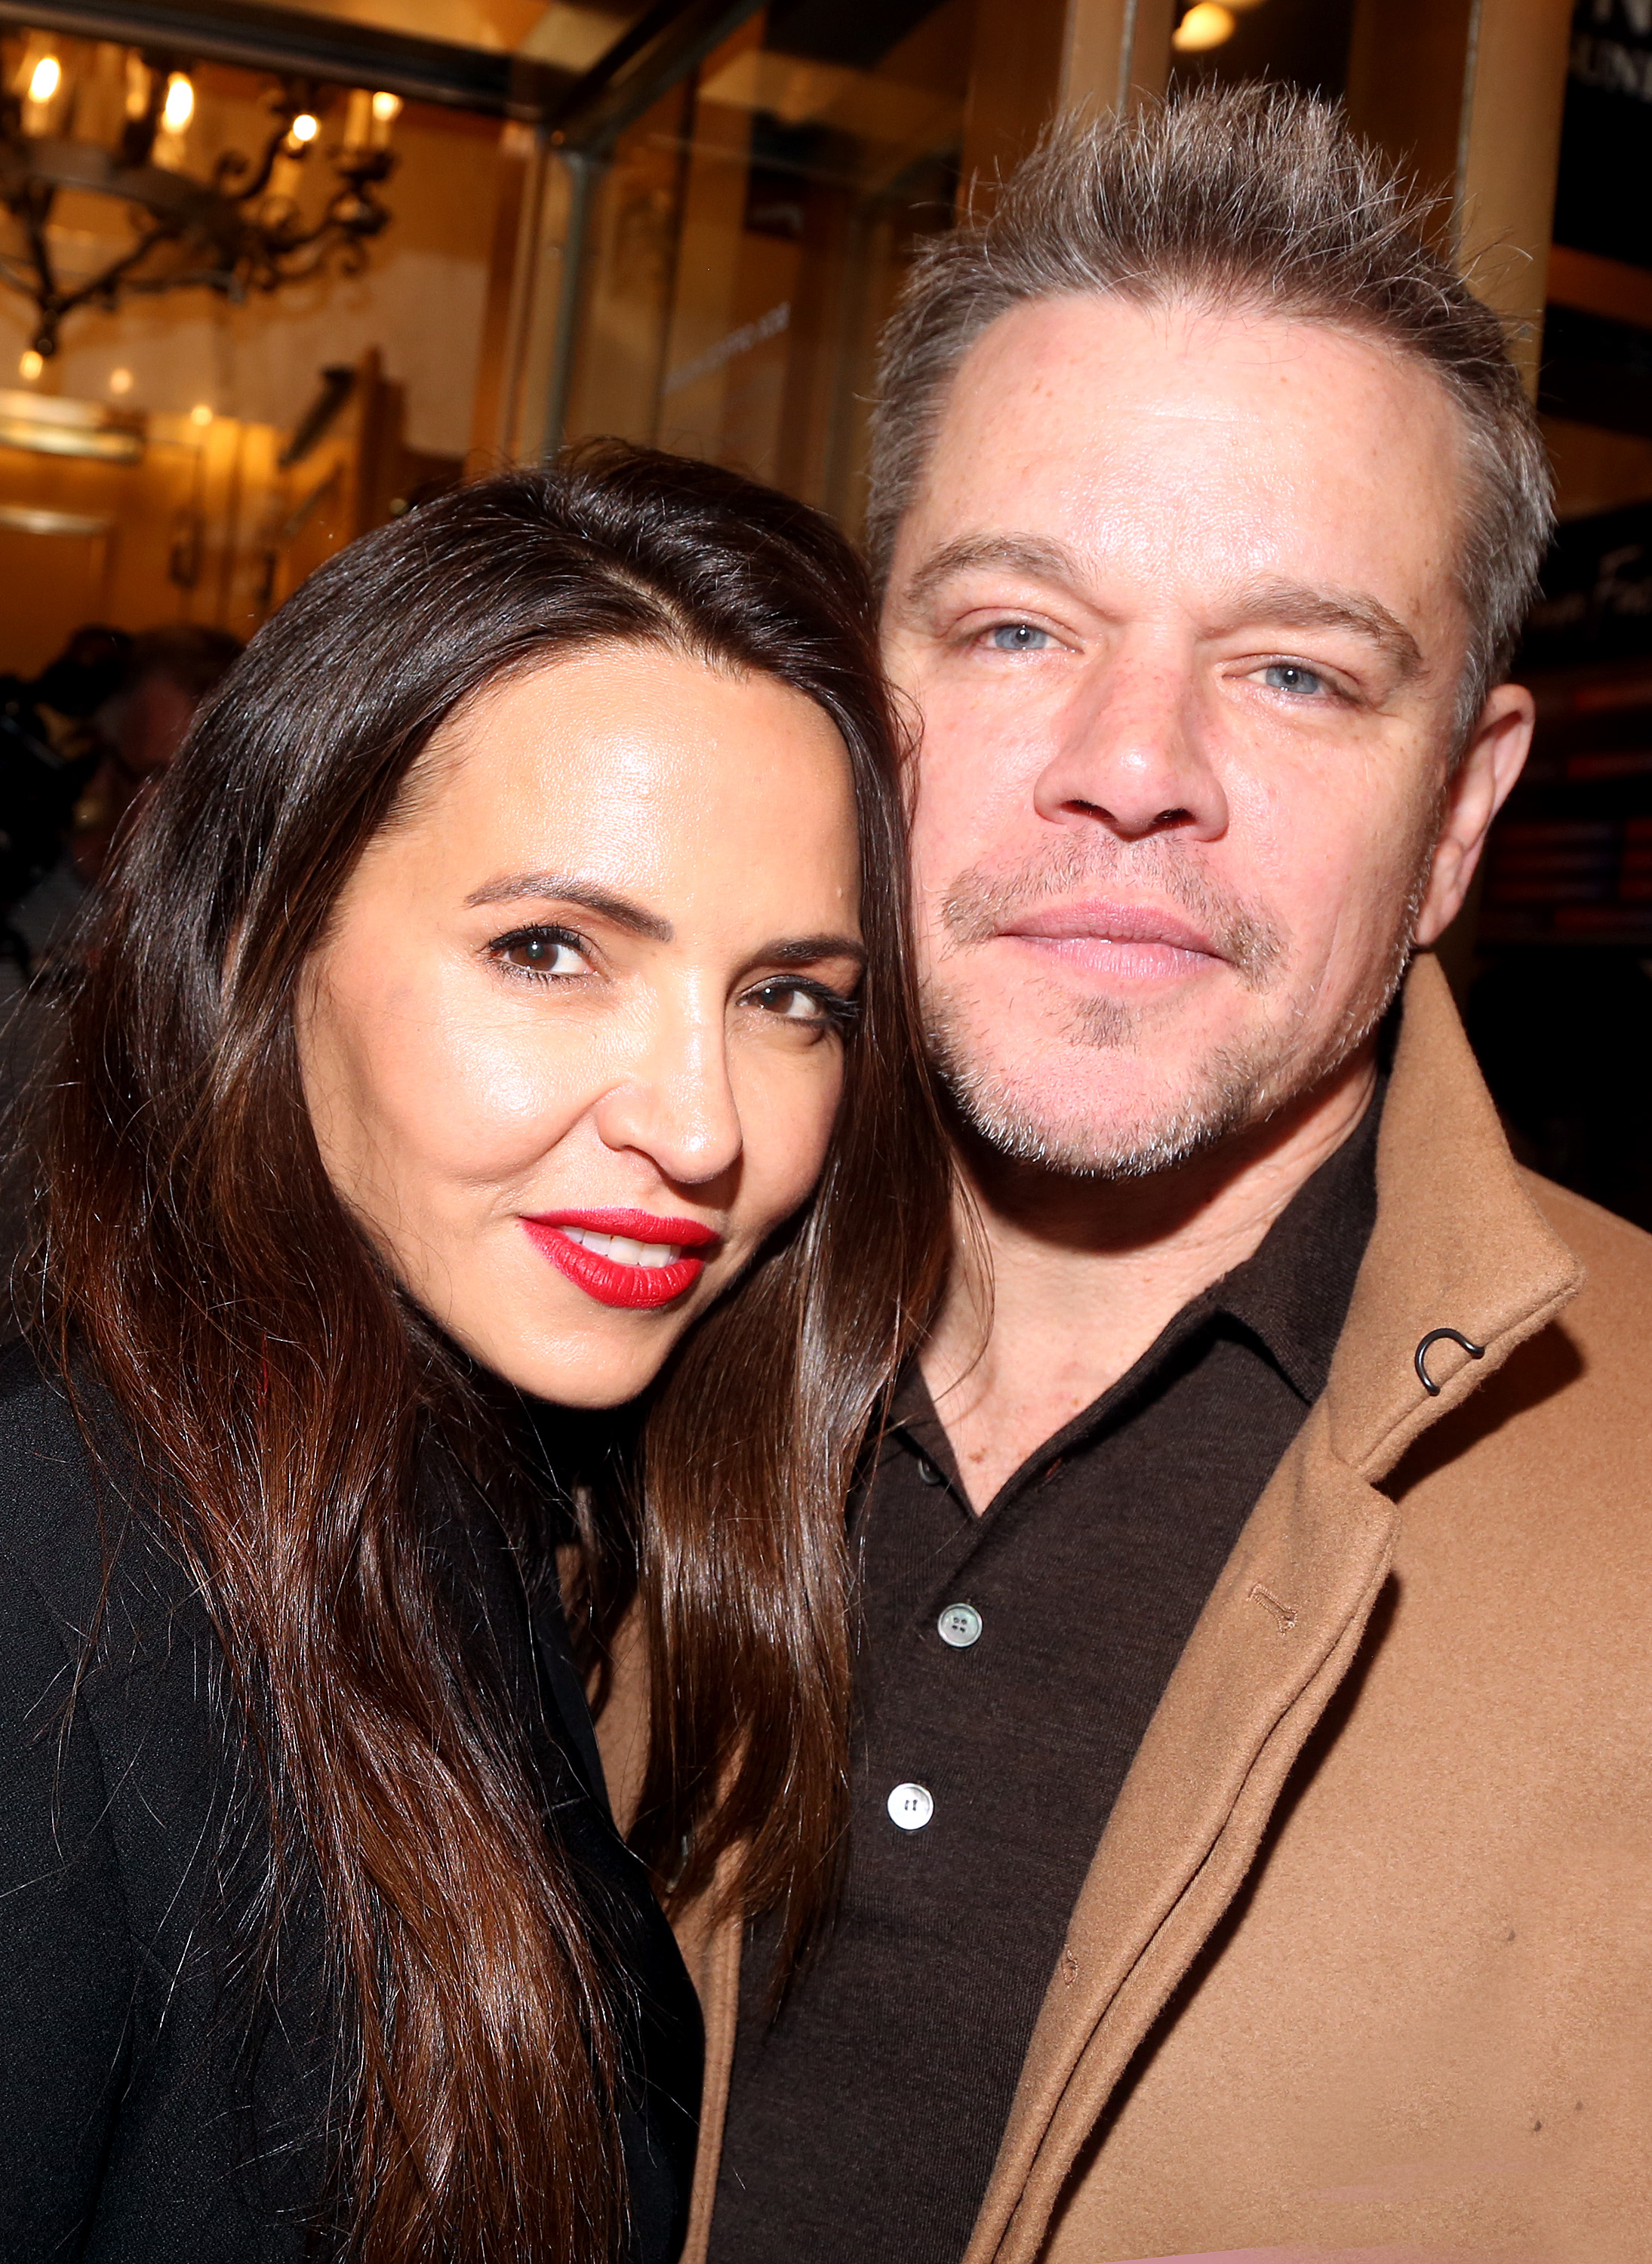 Luciana Barroso Damon and Matt Damon in New York City on April 23, 2023 | Source: Getty Images